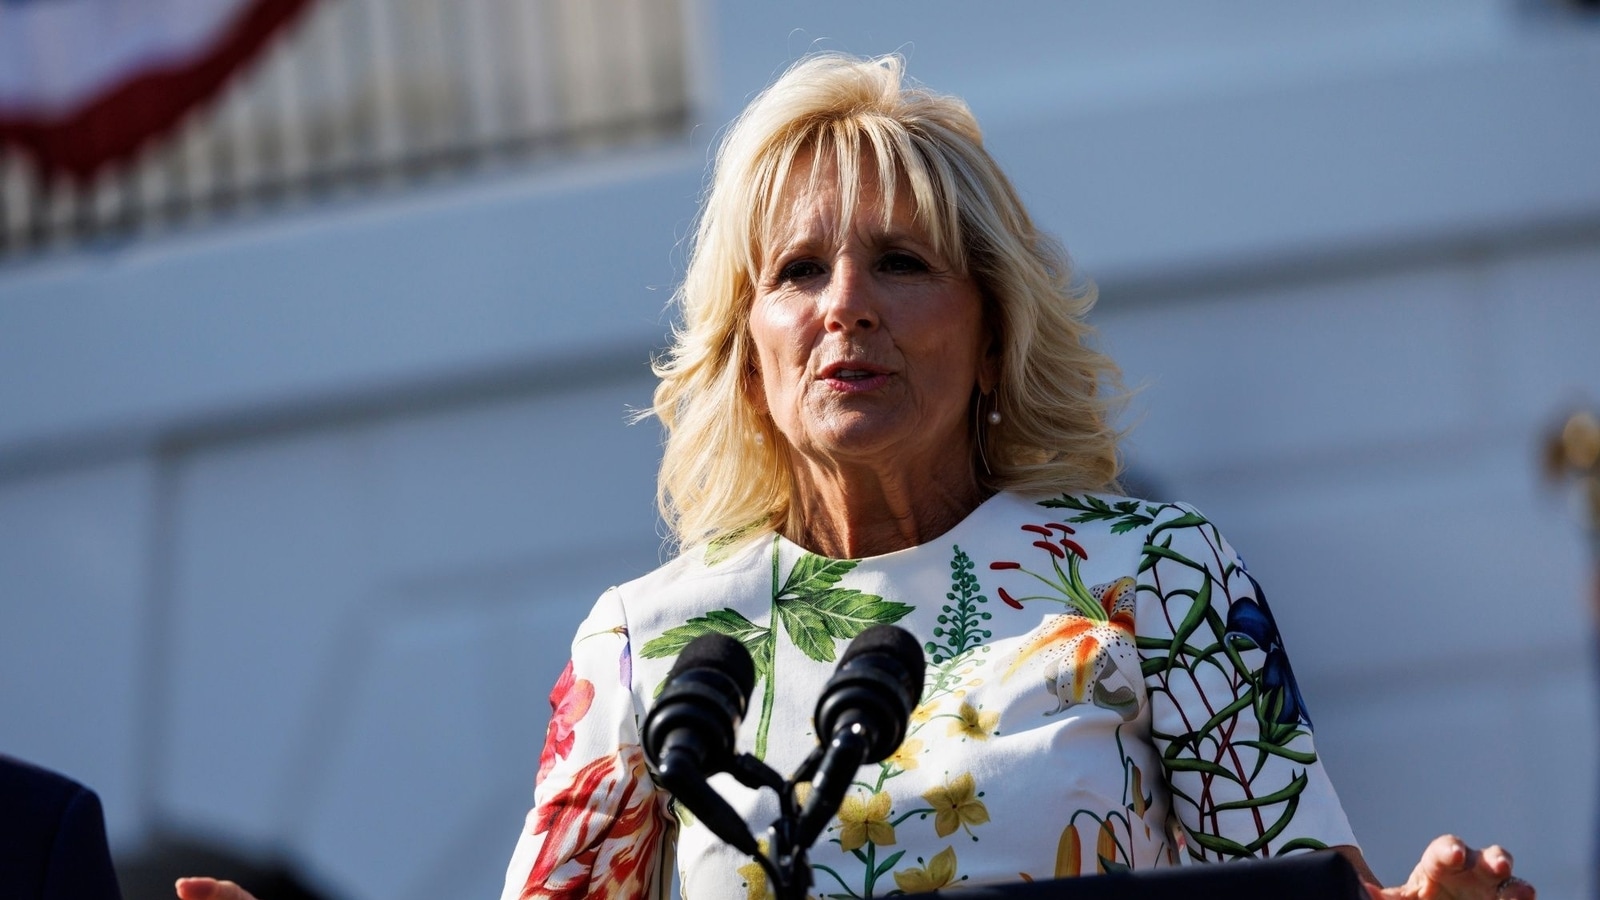 What Was Said By Jill Biden? As the San Antonio address backfires, a comment about breakfast tacos spurs internet criticism.